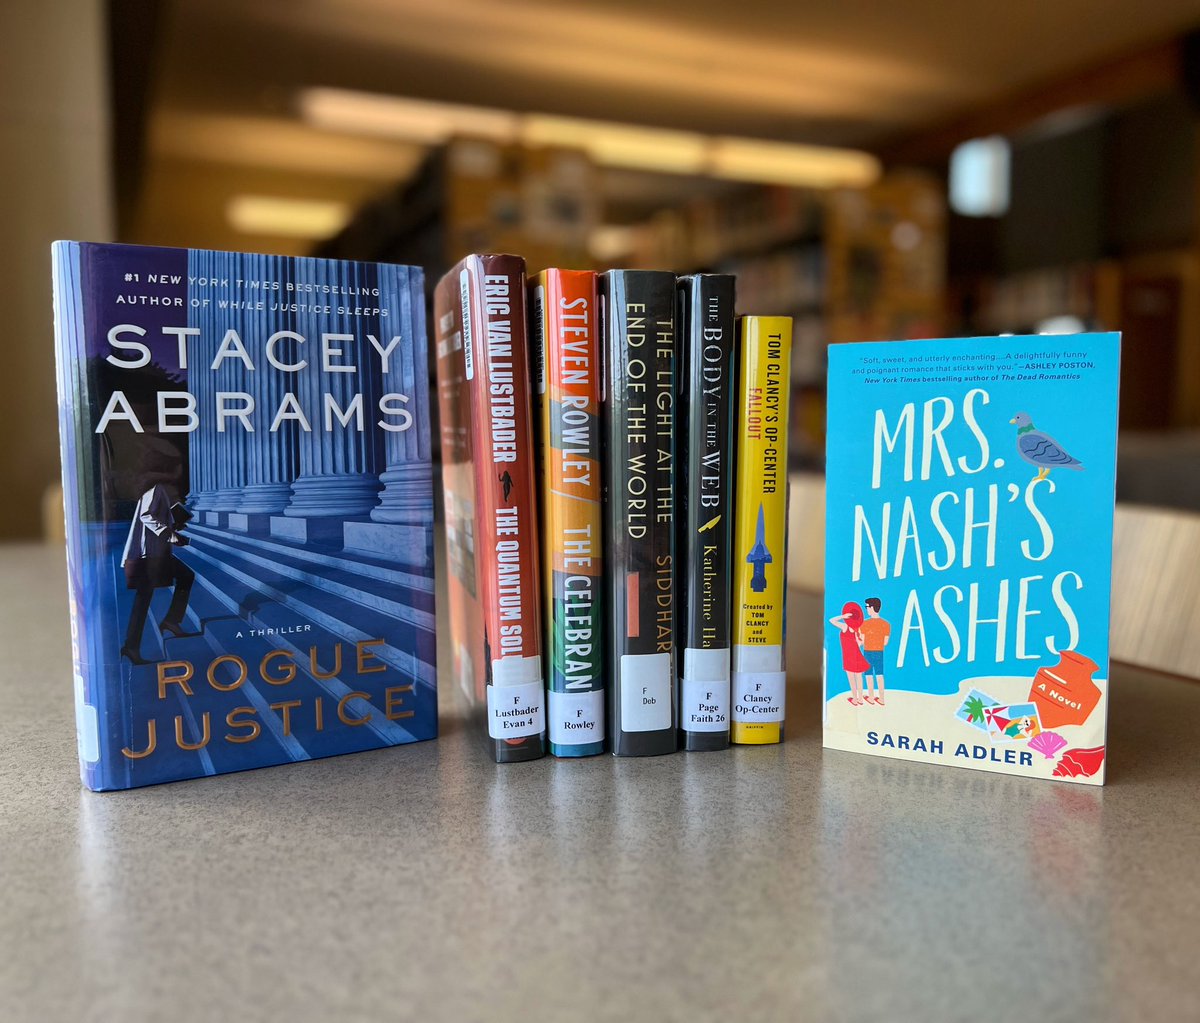 It’s #NewBookTuesday! Here’s a peek at what’s headed to the New Shelf today 👀📚😊